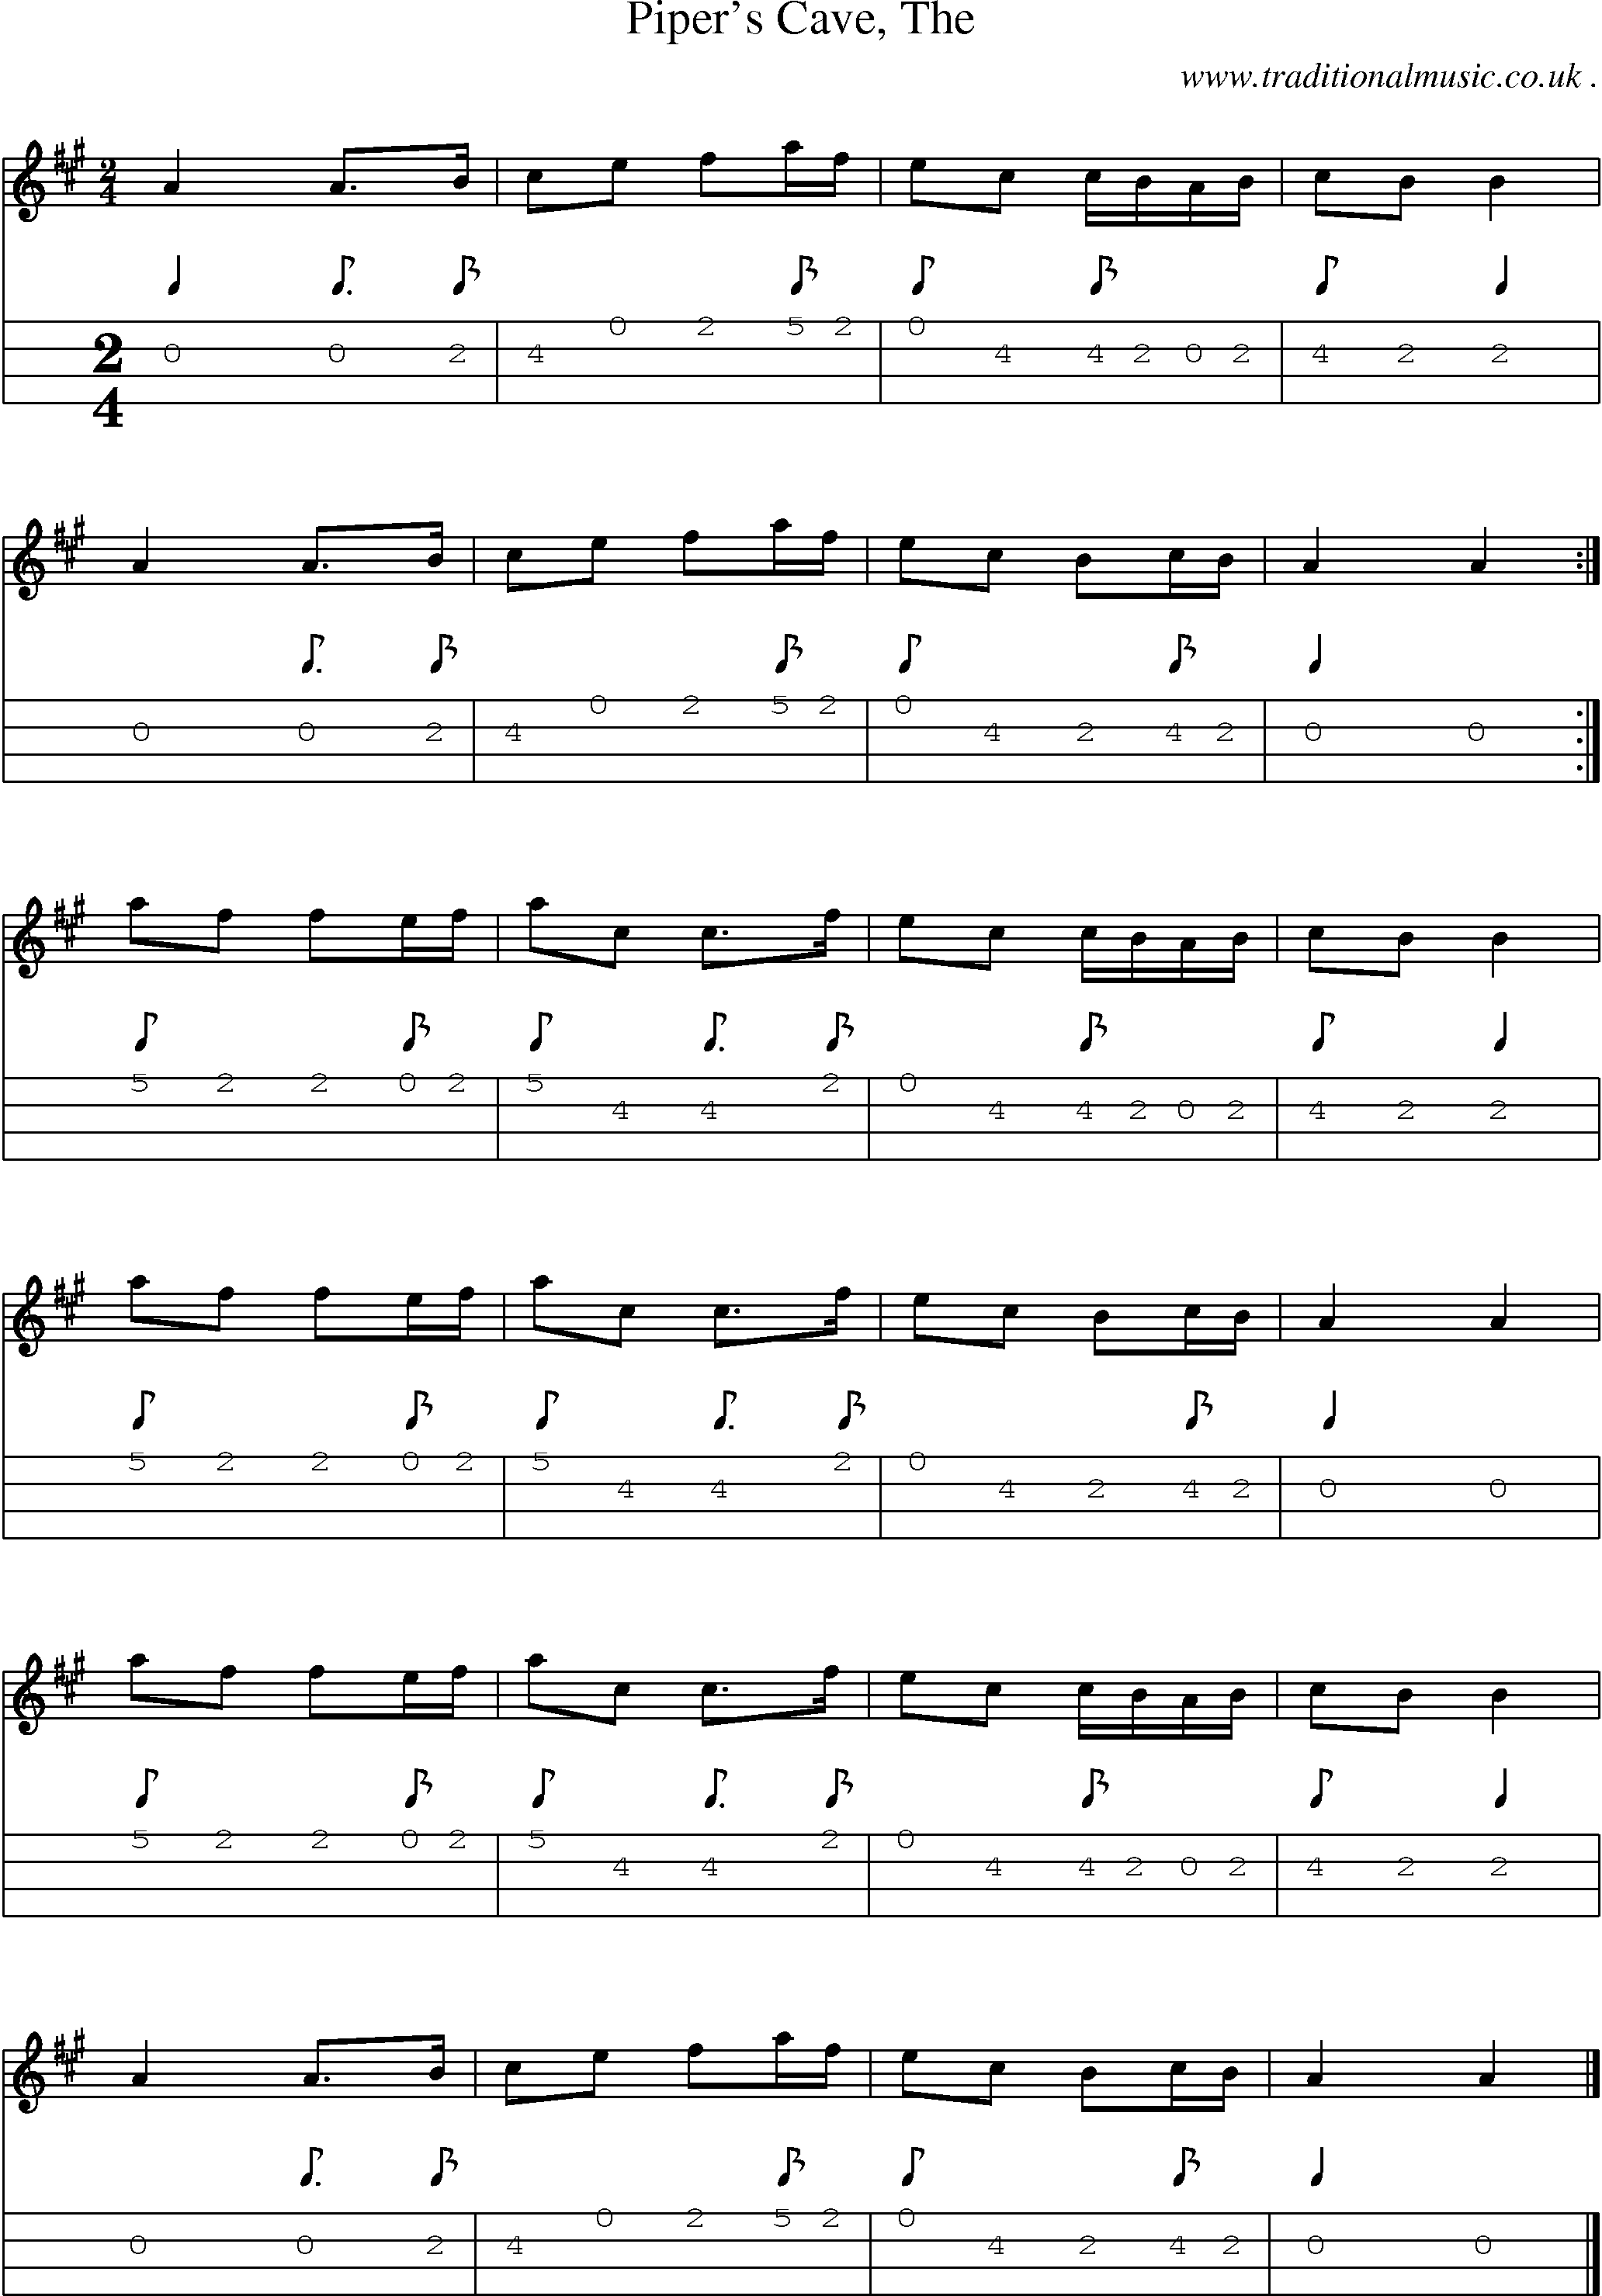 Sheet-music  score, Chords and Mandolin Tabs for Pipers Cave The